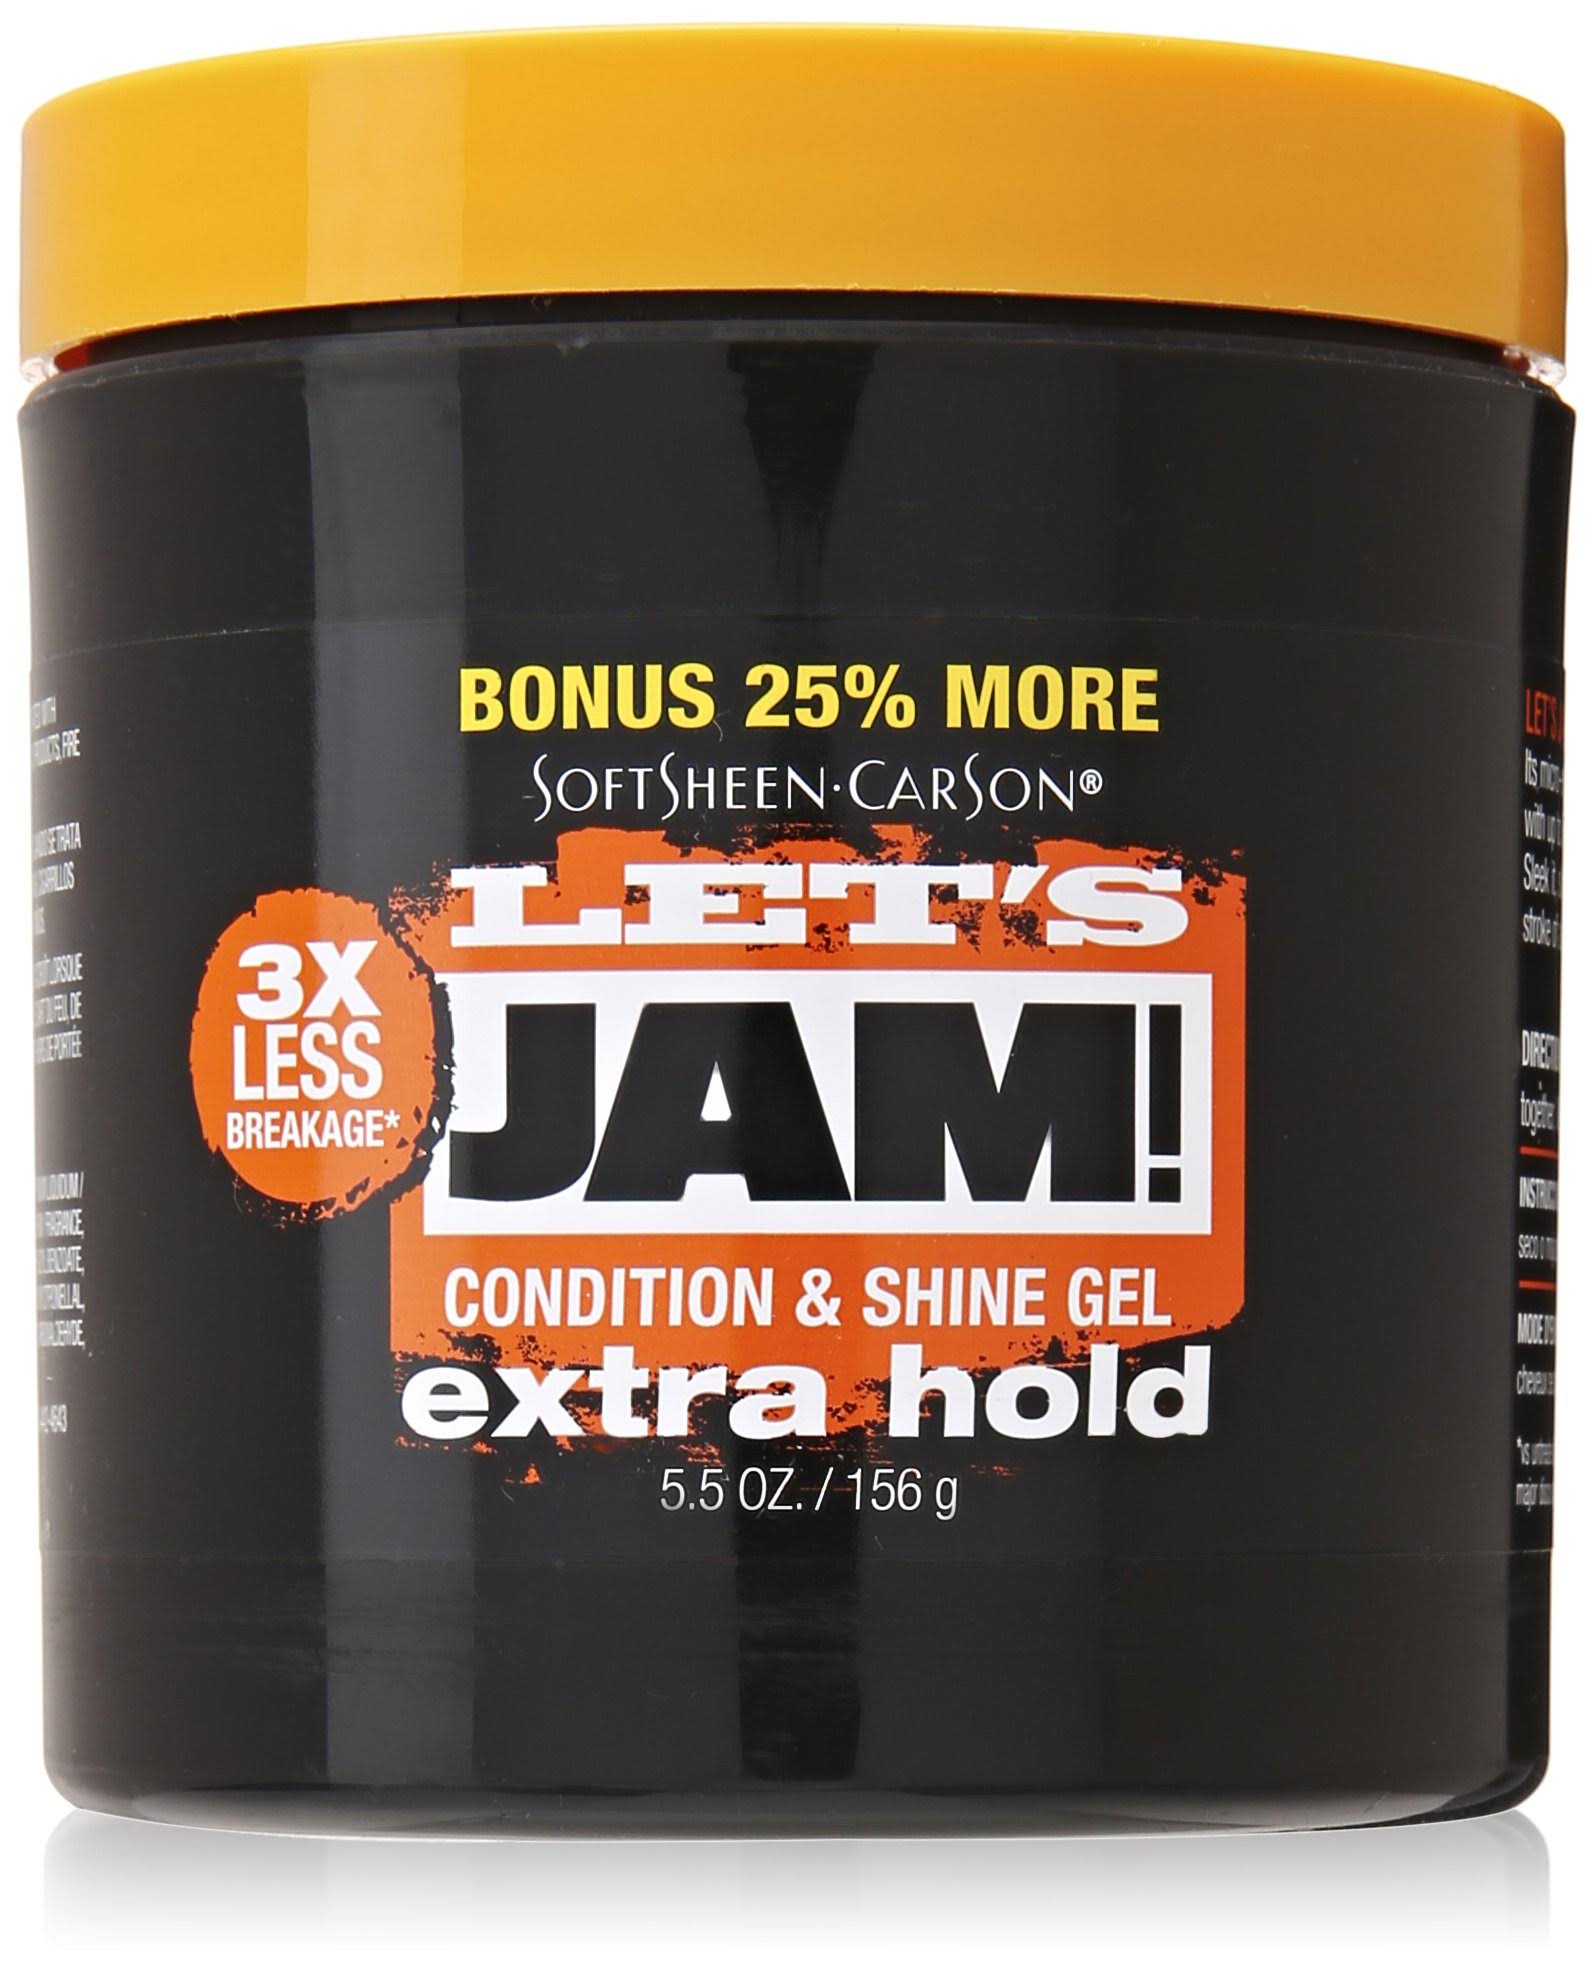 Let's Jam Shining & Conditioning Gel - Extra Hold